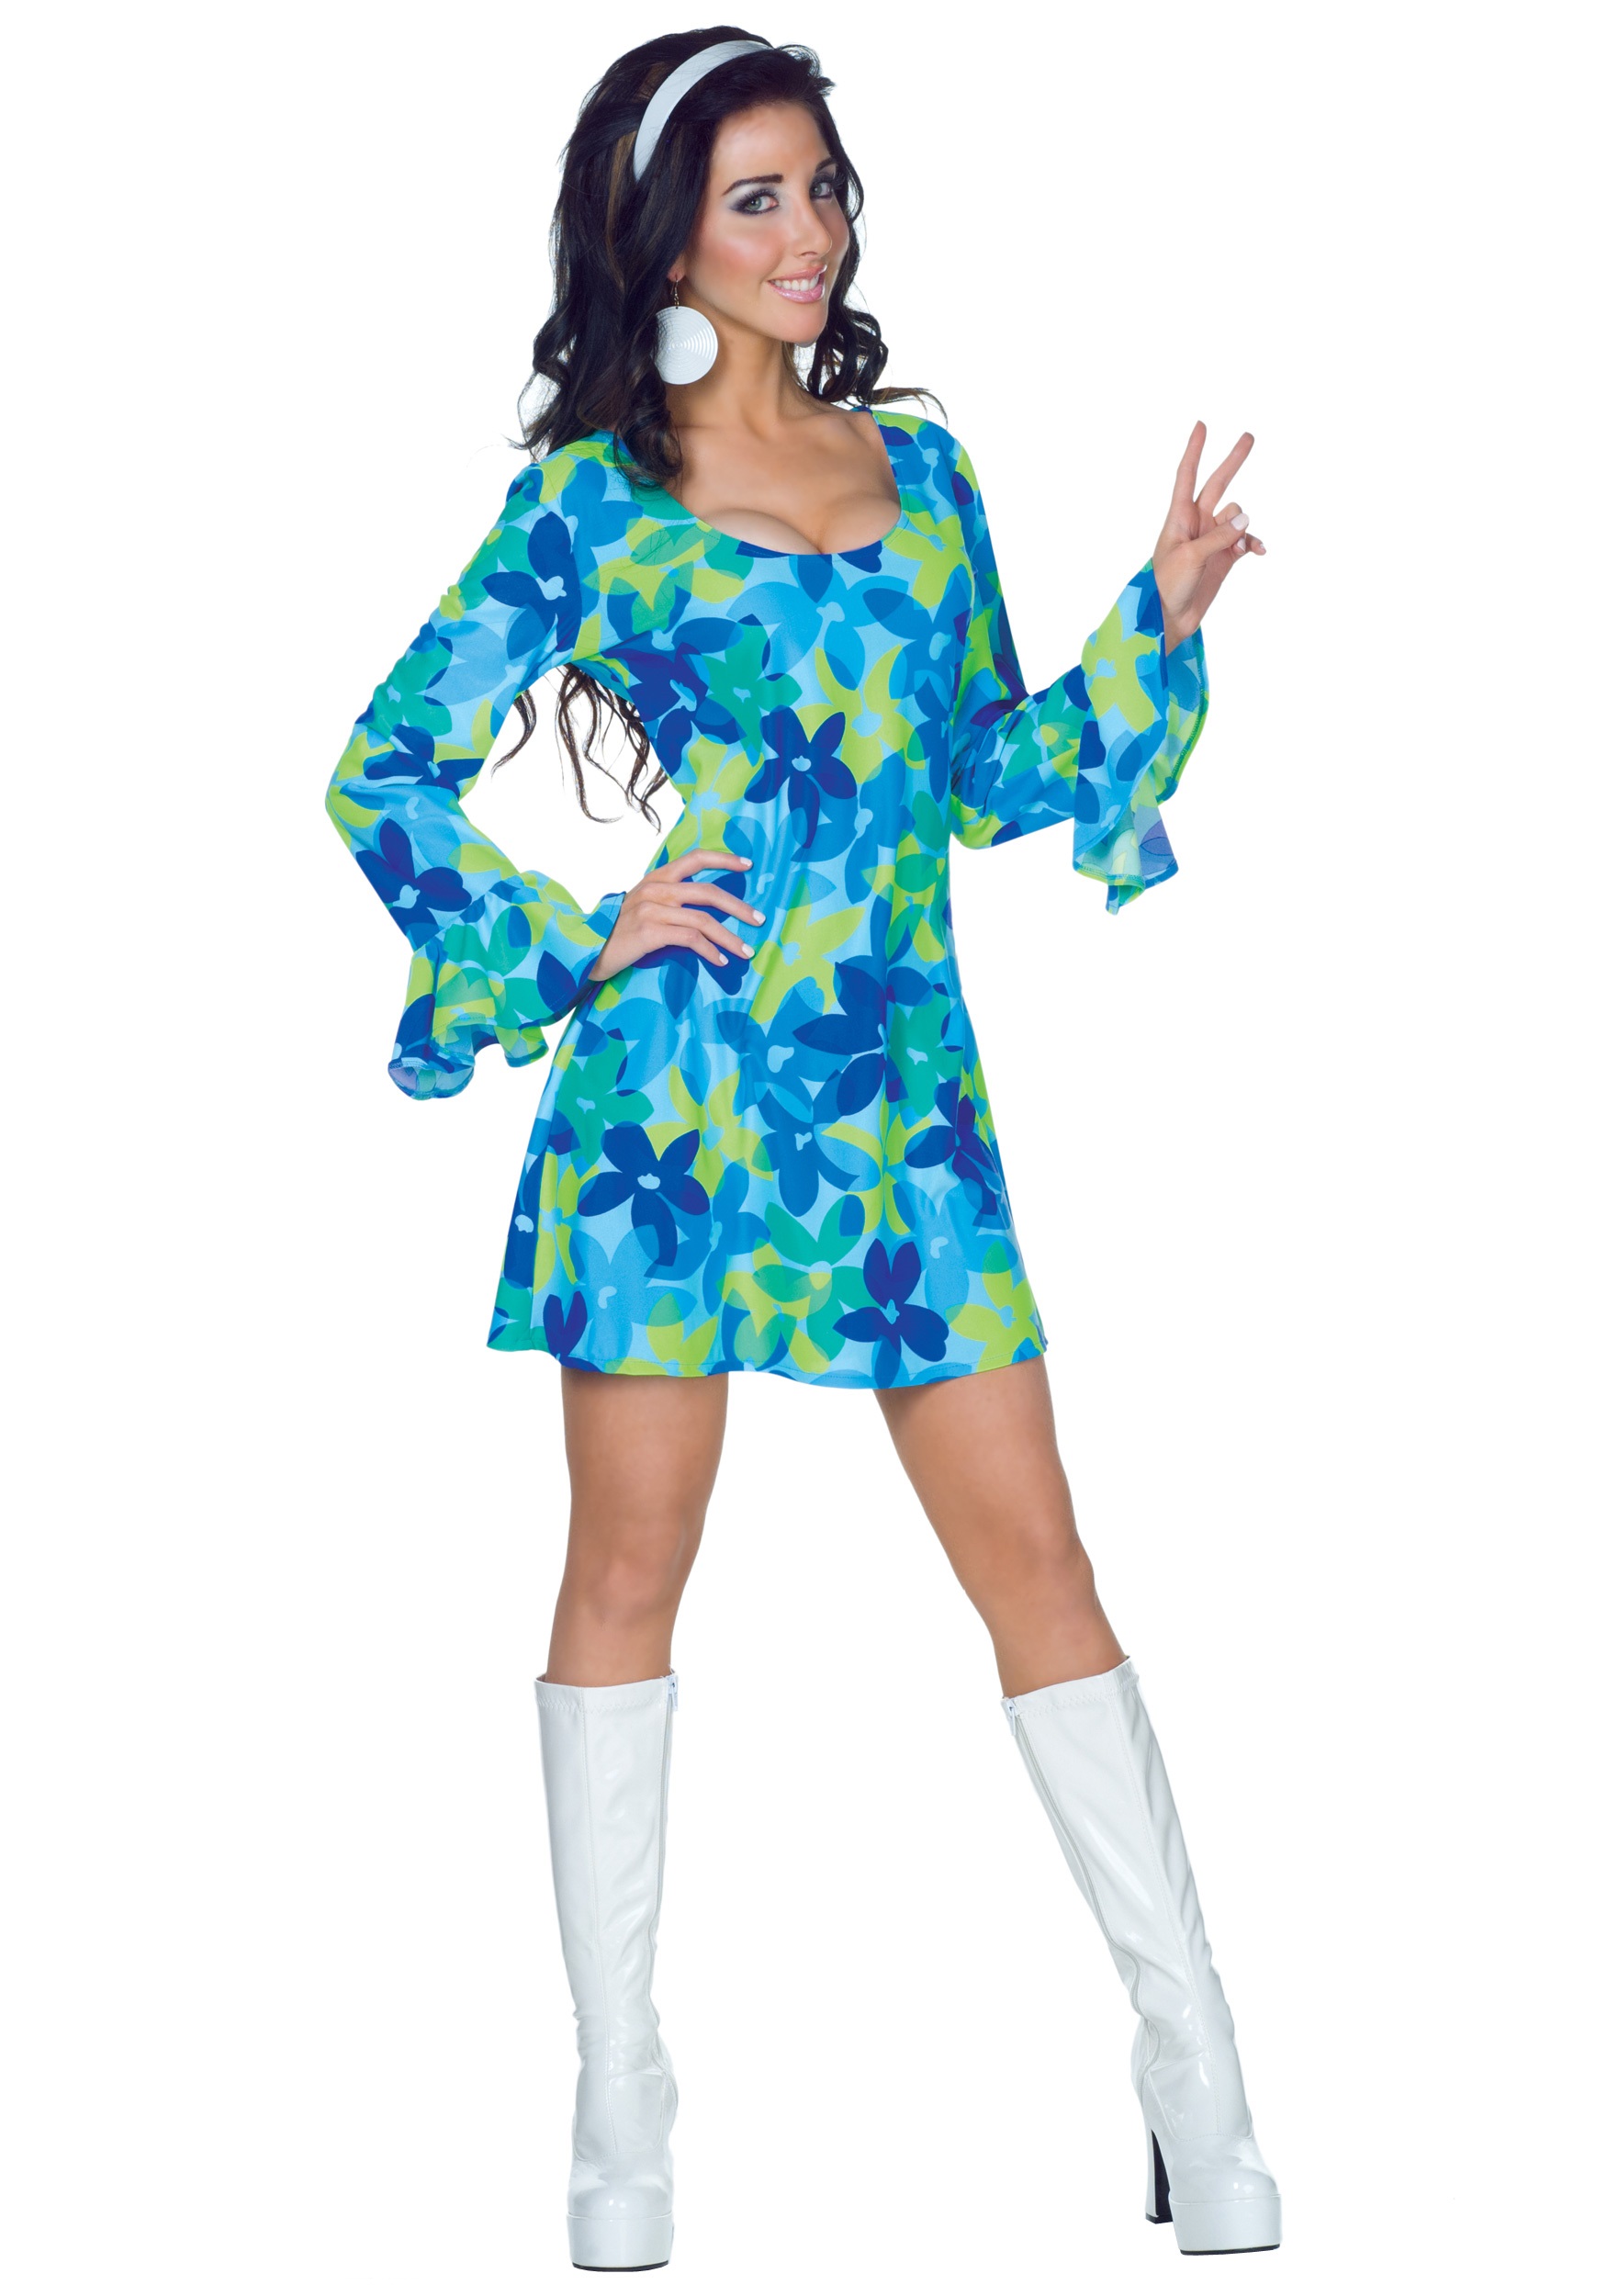 70s Costumes & Outfits For Halloween - HalloweenCostumes.com